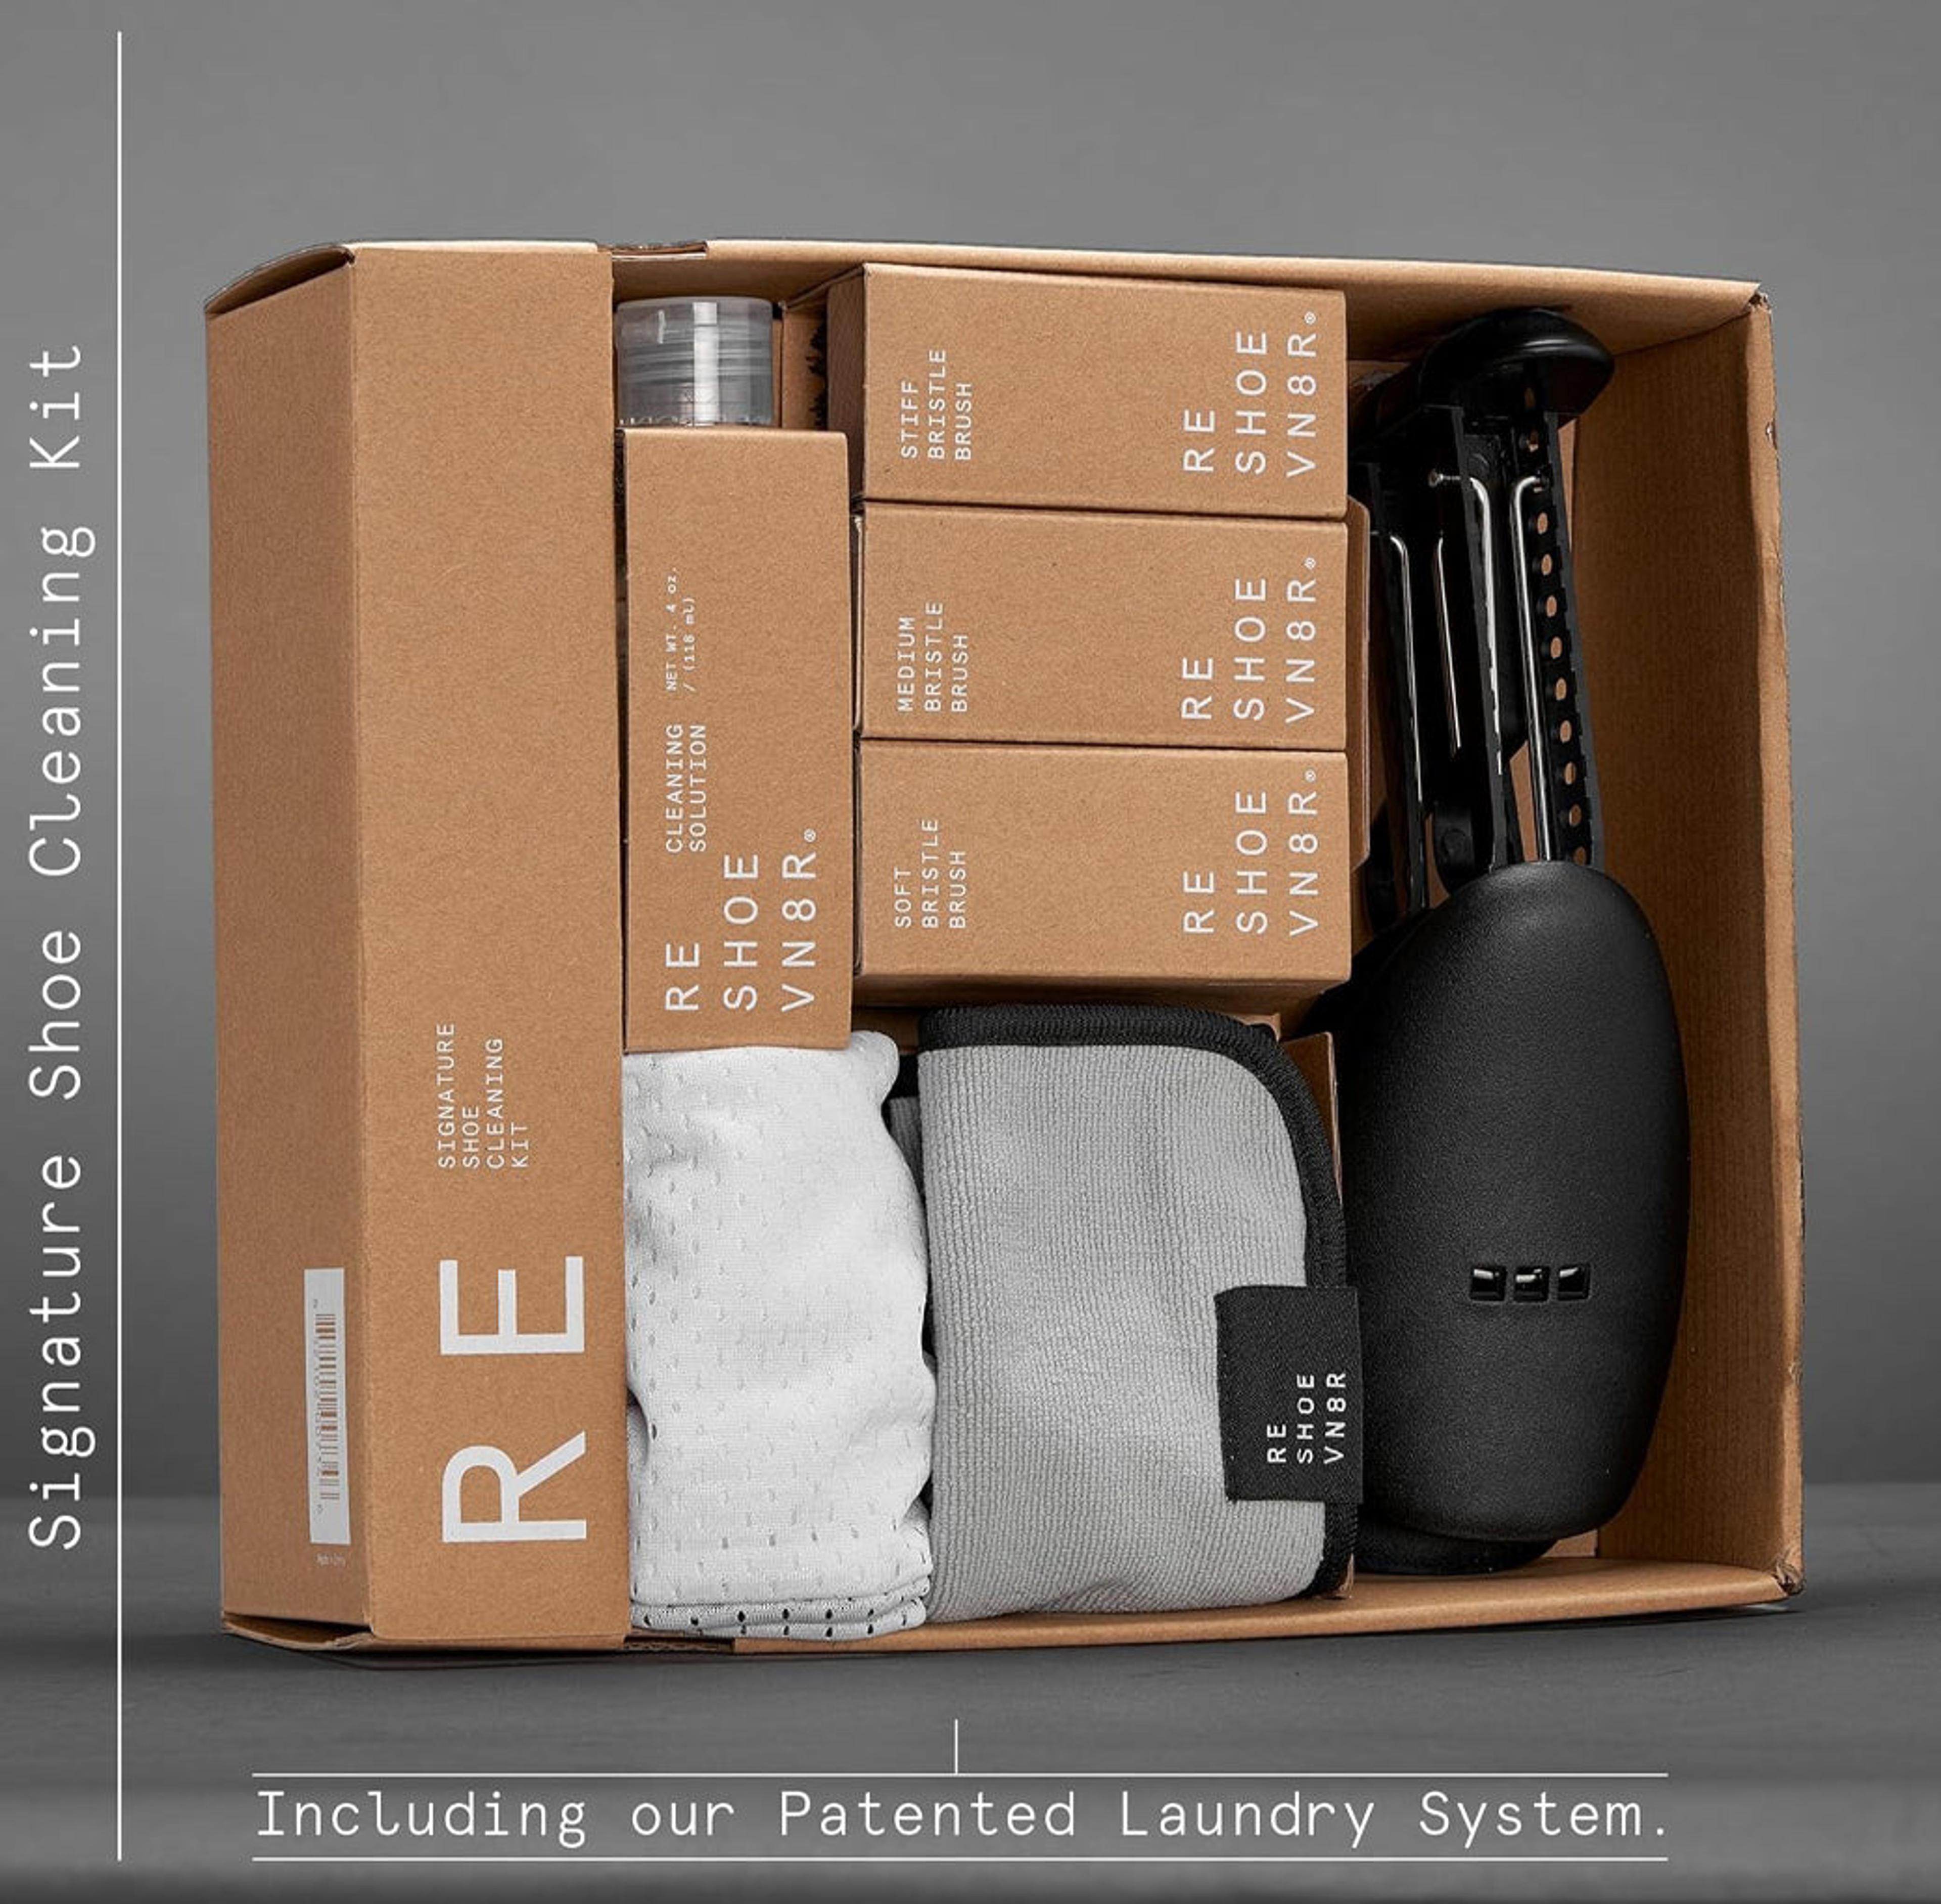 Alternate View 1 of Signature Shoe Laundry Cleaning Kit